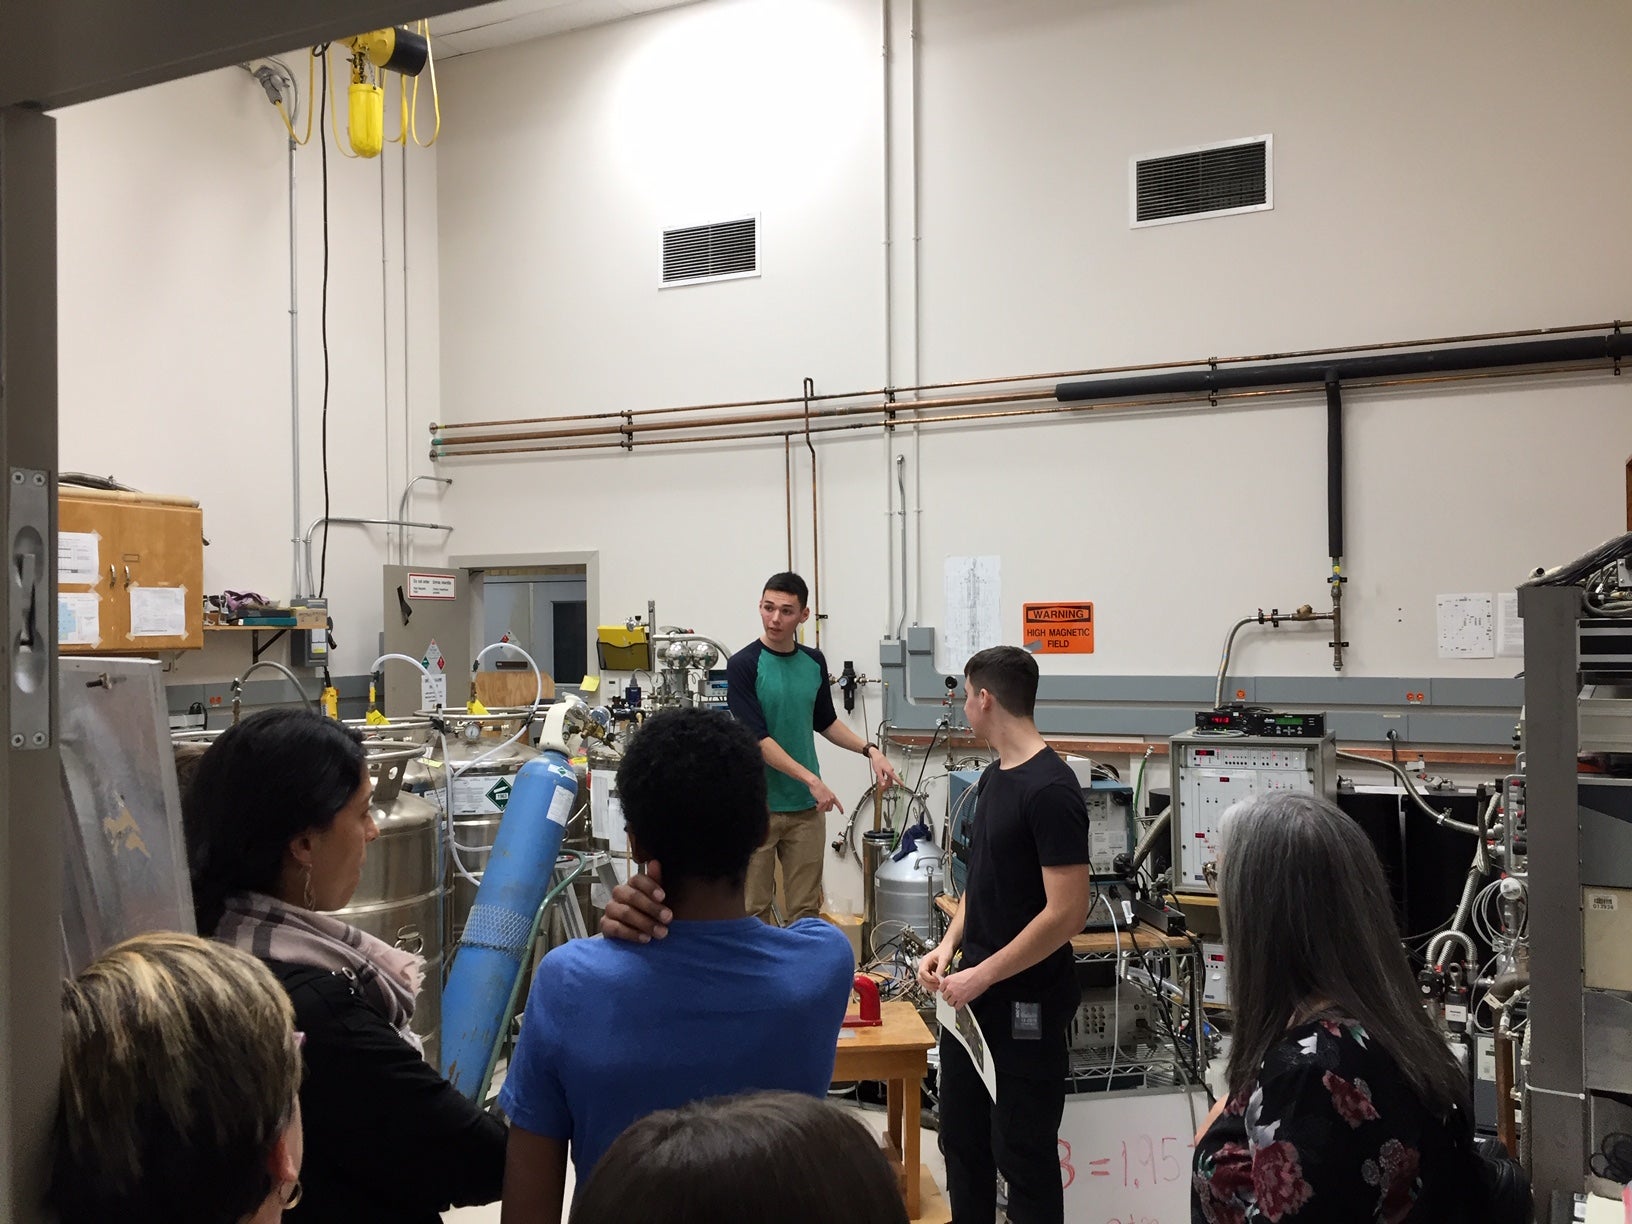 Jordan giving a tour at National Research of Canada's lab.